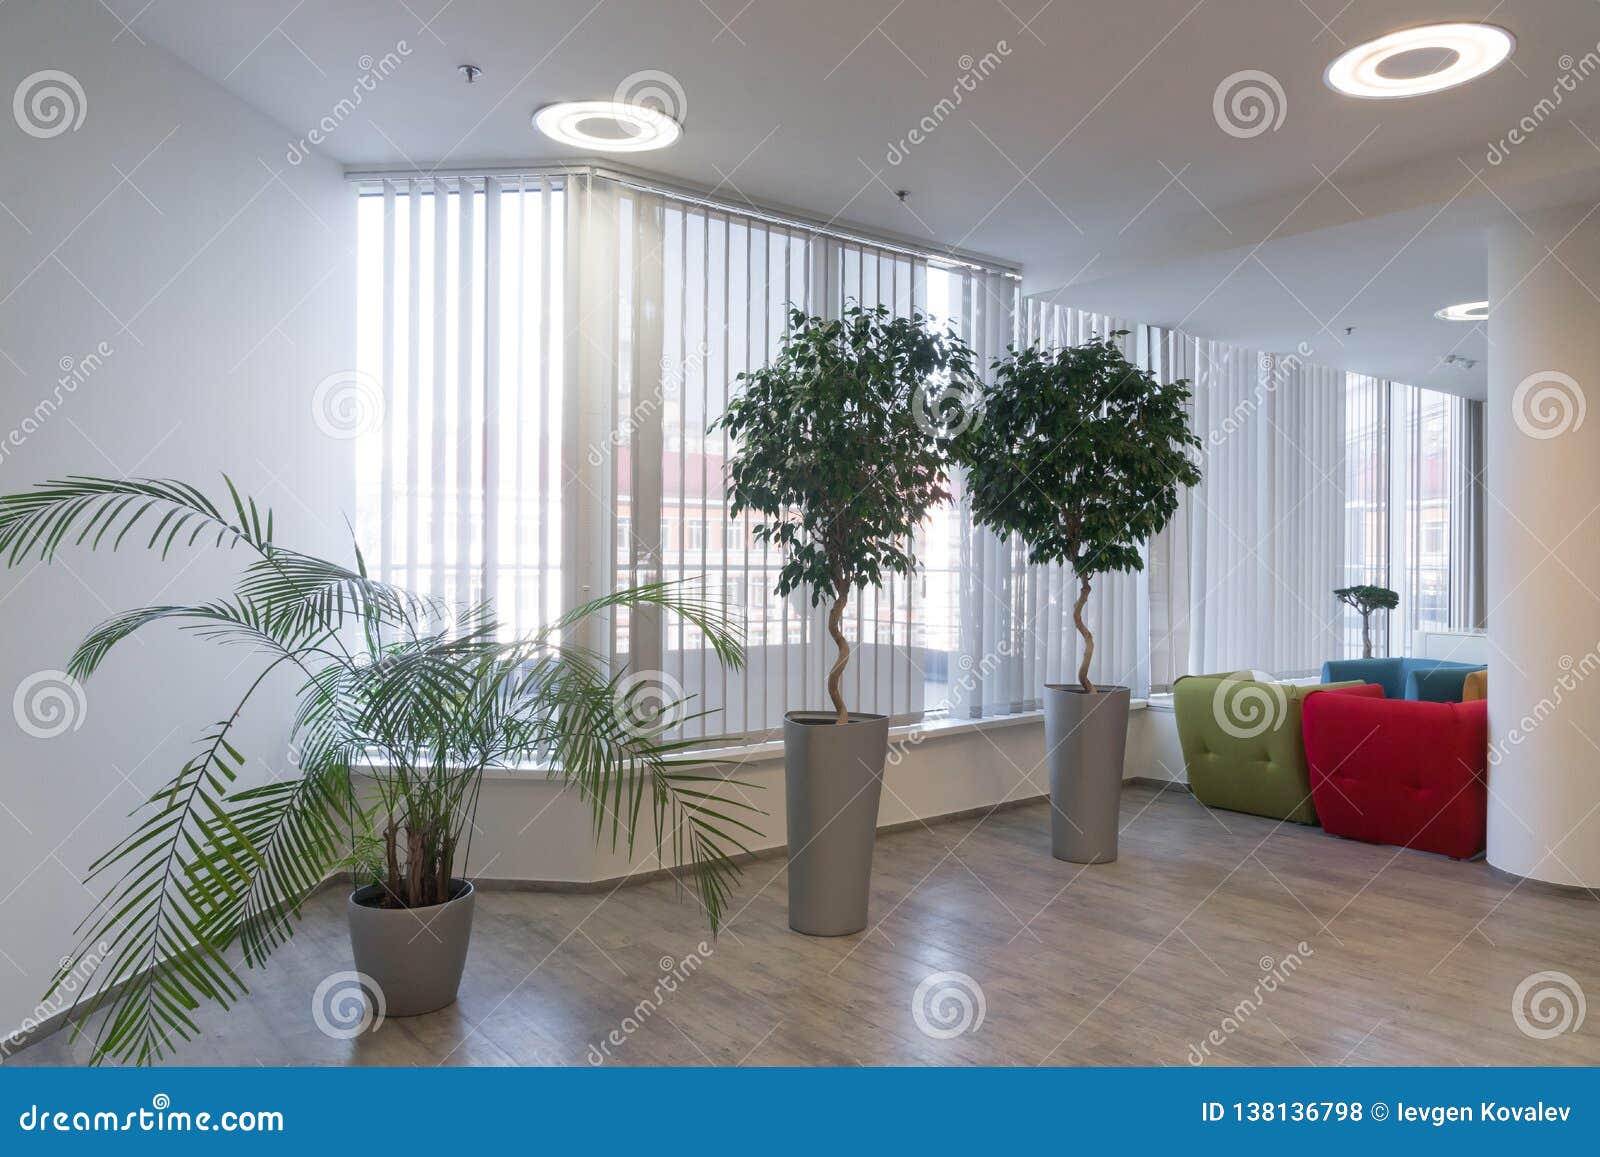 Fashion And Modern Office Interiors Stock Photo Image Of